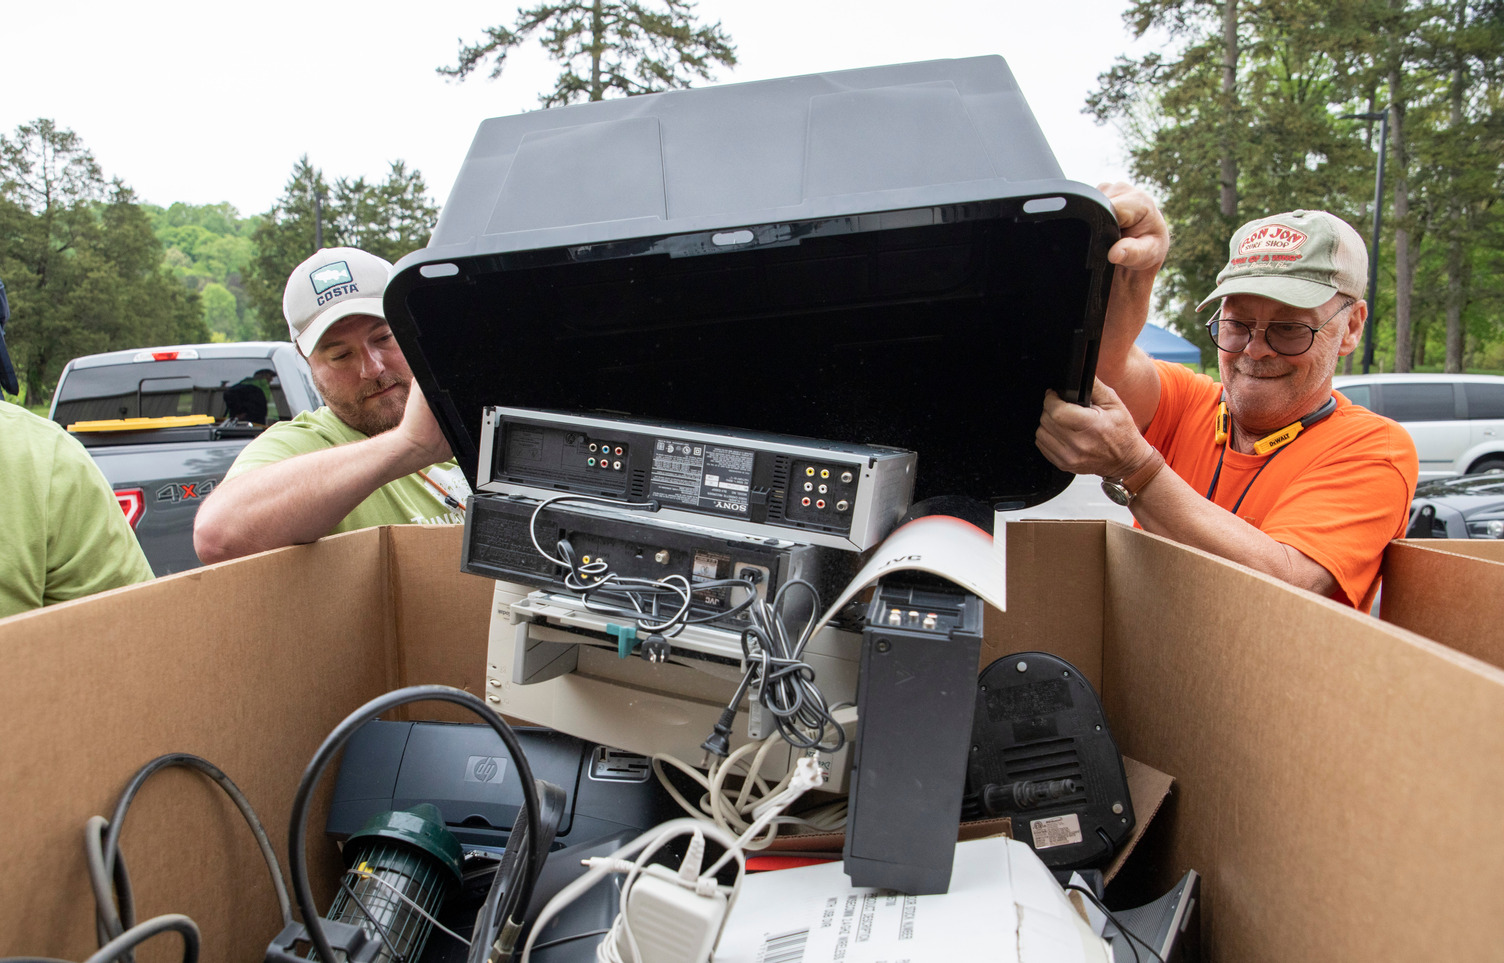 Two ORISE safety technicians assist with recycling during an annual Earth Day event